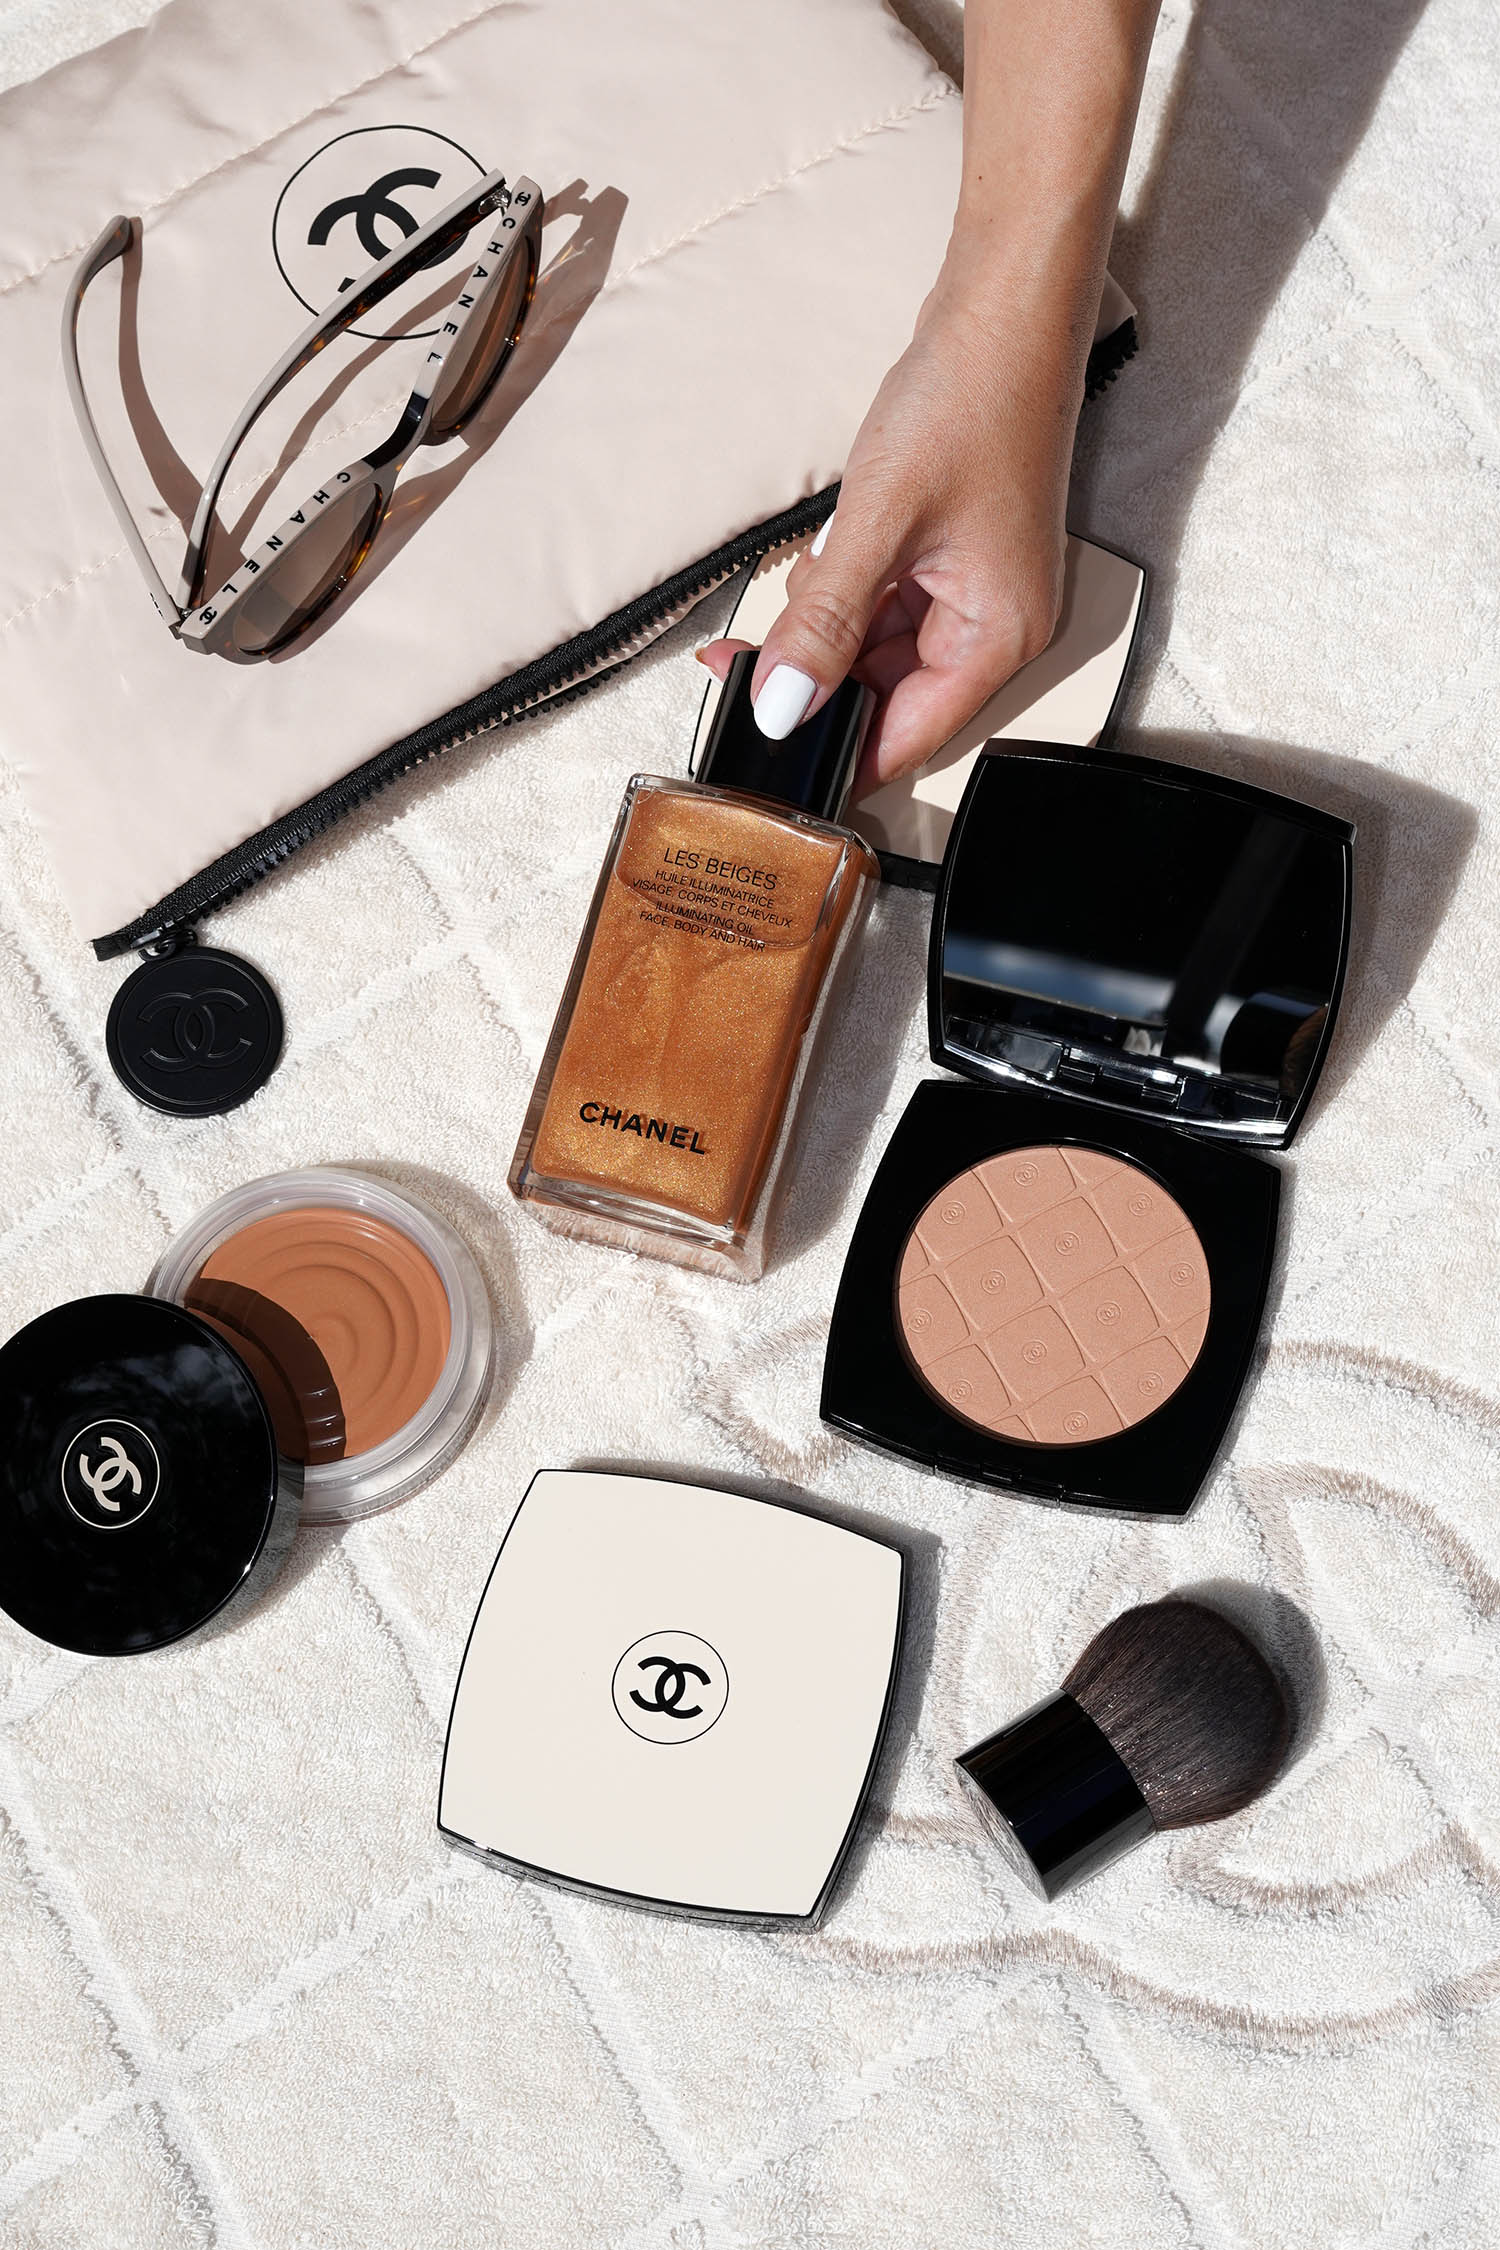 CHANEL BEAUTY Community on Instagram: Soak in the luminosity of summer  anywhere you go with the new LES BEIGES Travel-Size Healthy Glow Illuminating  Oil. Makeup Artist @tashareikobrown applies the weightless dry oil